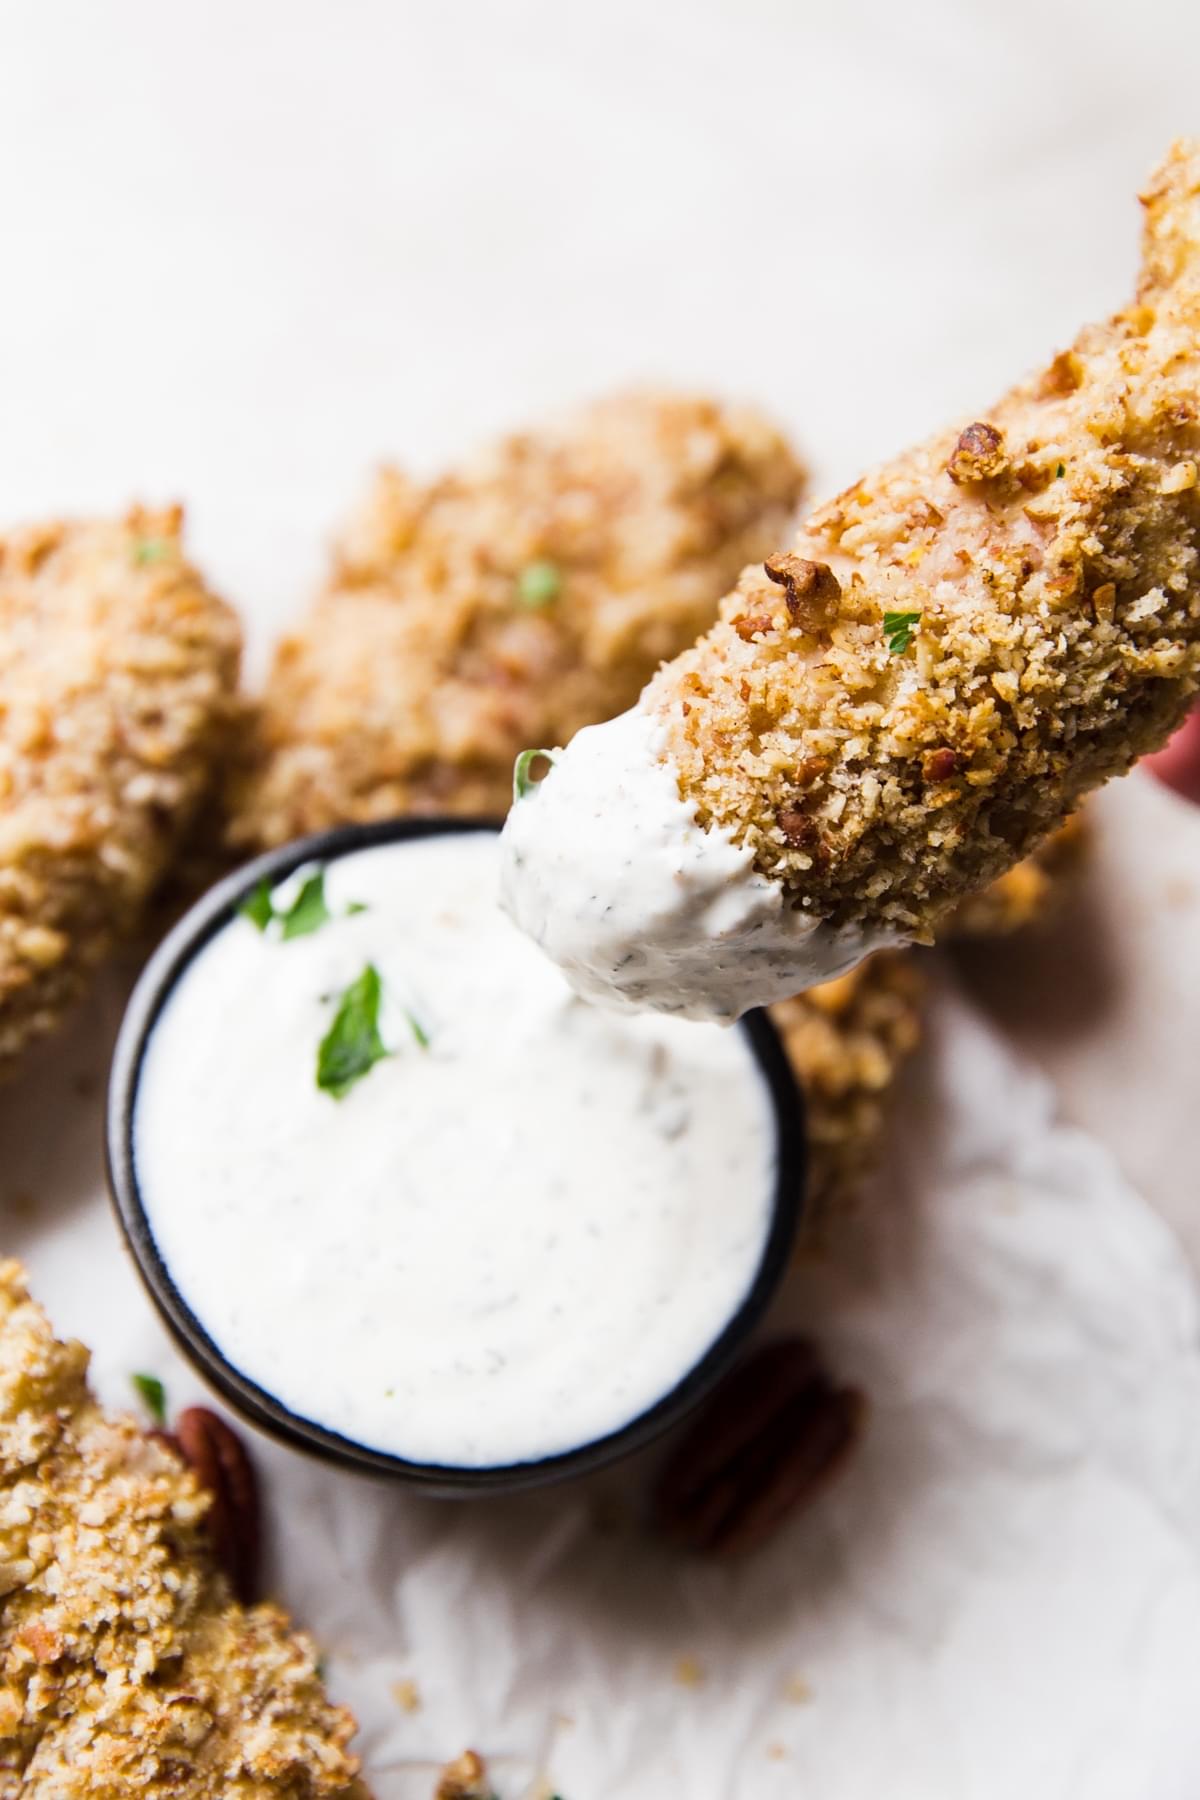 Chicken finger being dipped into ranch dressing